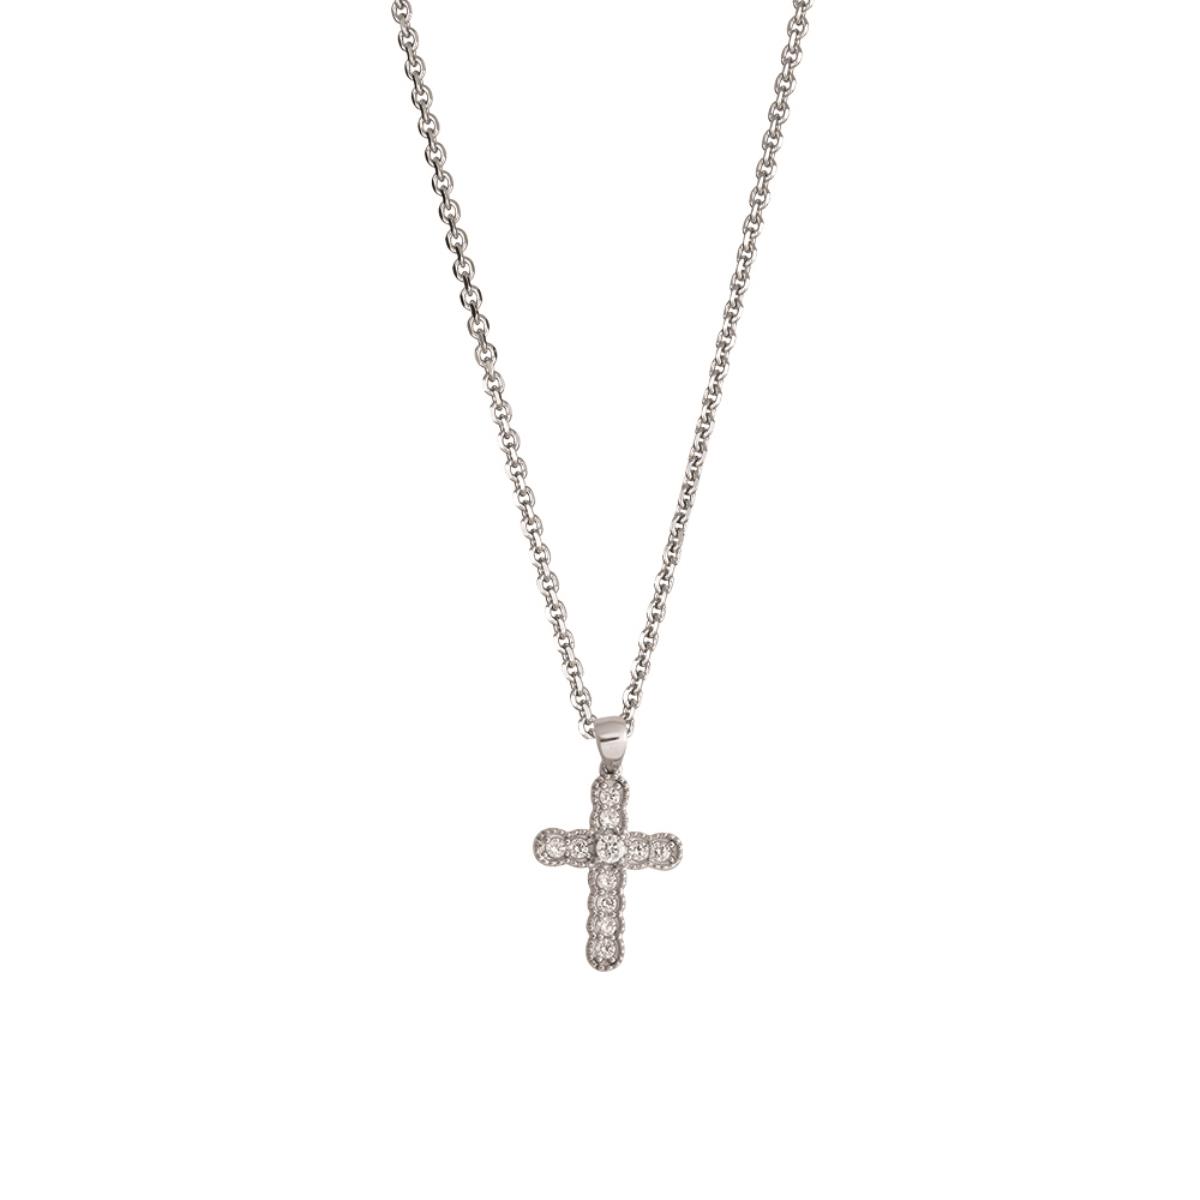 Sterling Silver Rhodium Milgrain Cross 18" Necklace with 2" Extension